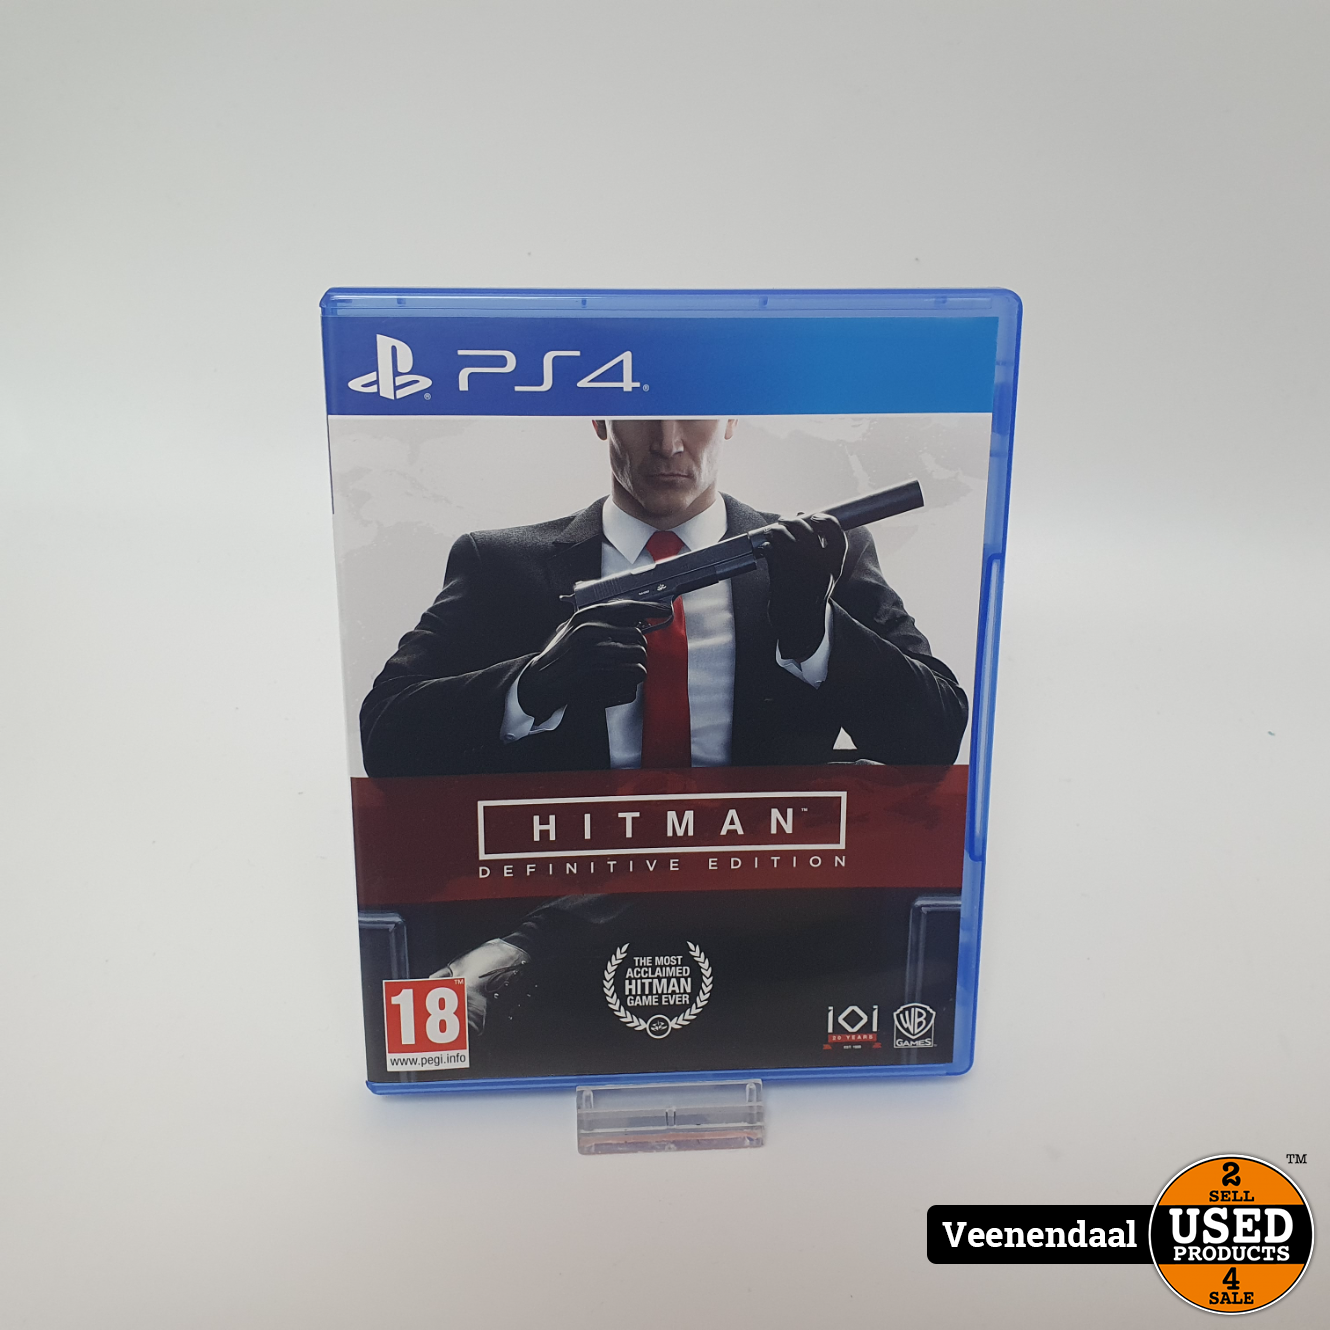 PS4 Hitman Definitive Edition in Nette Staat Used Products Veenendaal